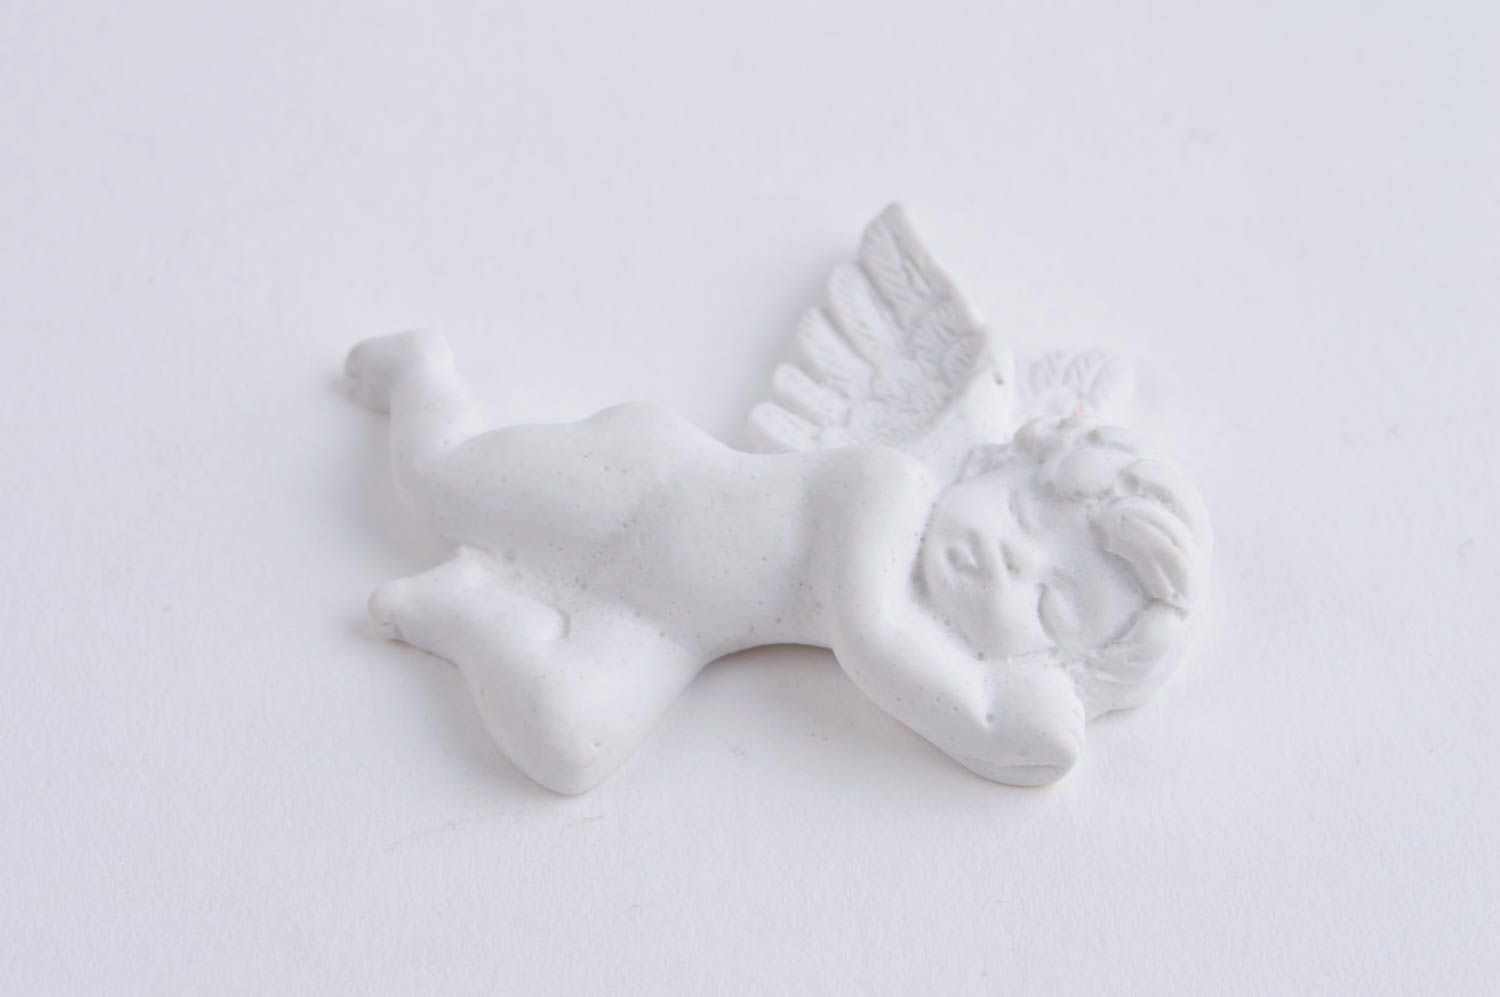 Handmade craft blank arts and crafts supply plaster figurine gift ideas for kids photo 2